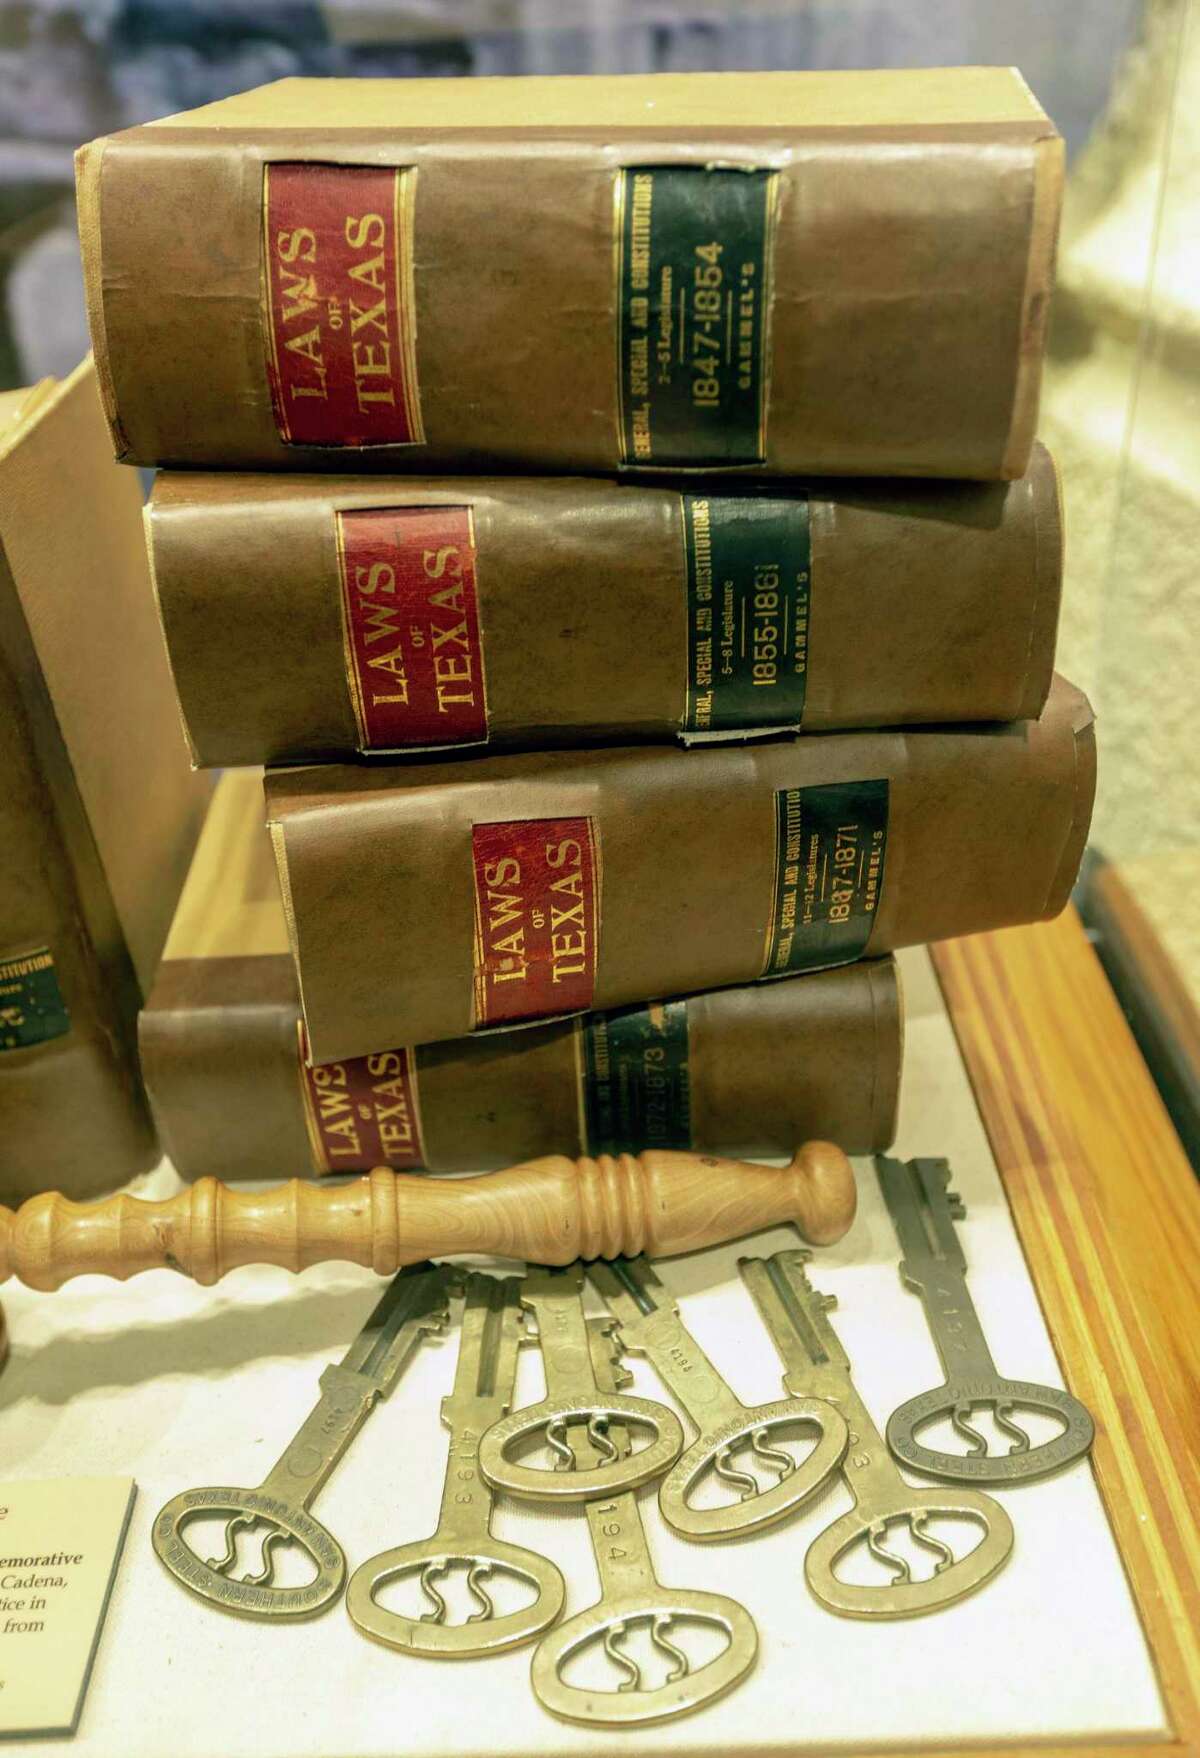 An exhibit seen Oct. 8, 2019 at the newly opened Bexar County Heritage Center in the Bexar County Courthouse exhibits old lawbooks and antique jail cell keys. The museum-like center features a series of exhibits that take visitors through the county's history.